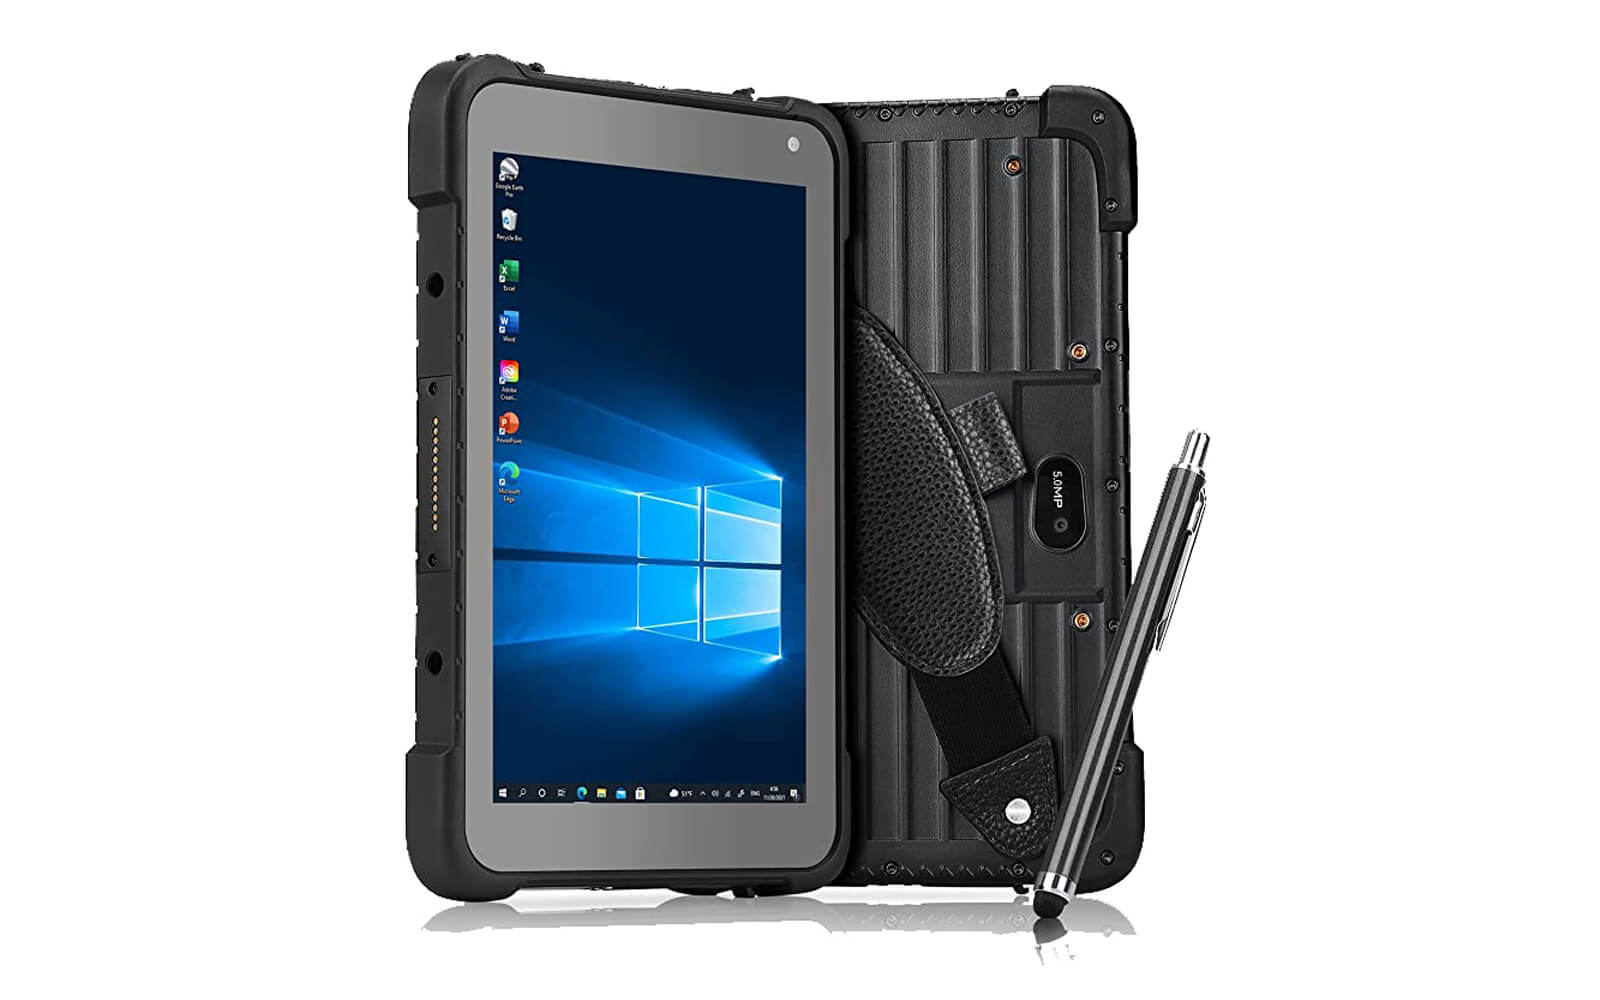 MUNBYN IRT04 Android Rugged Tablet PC